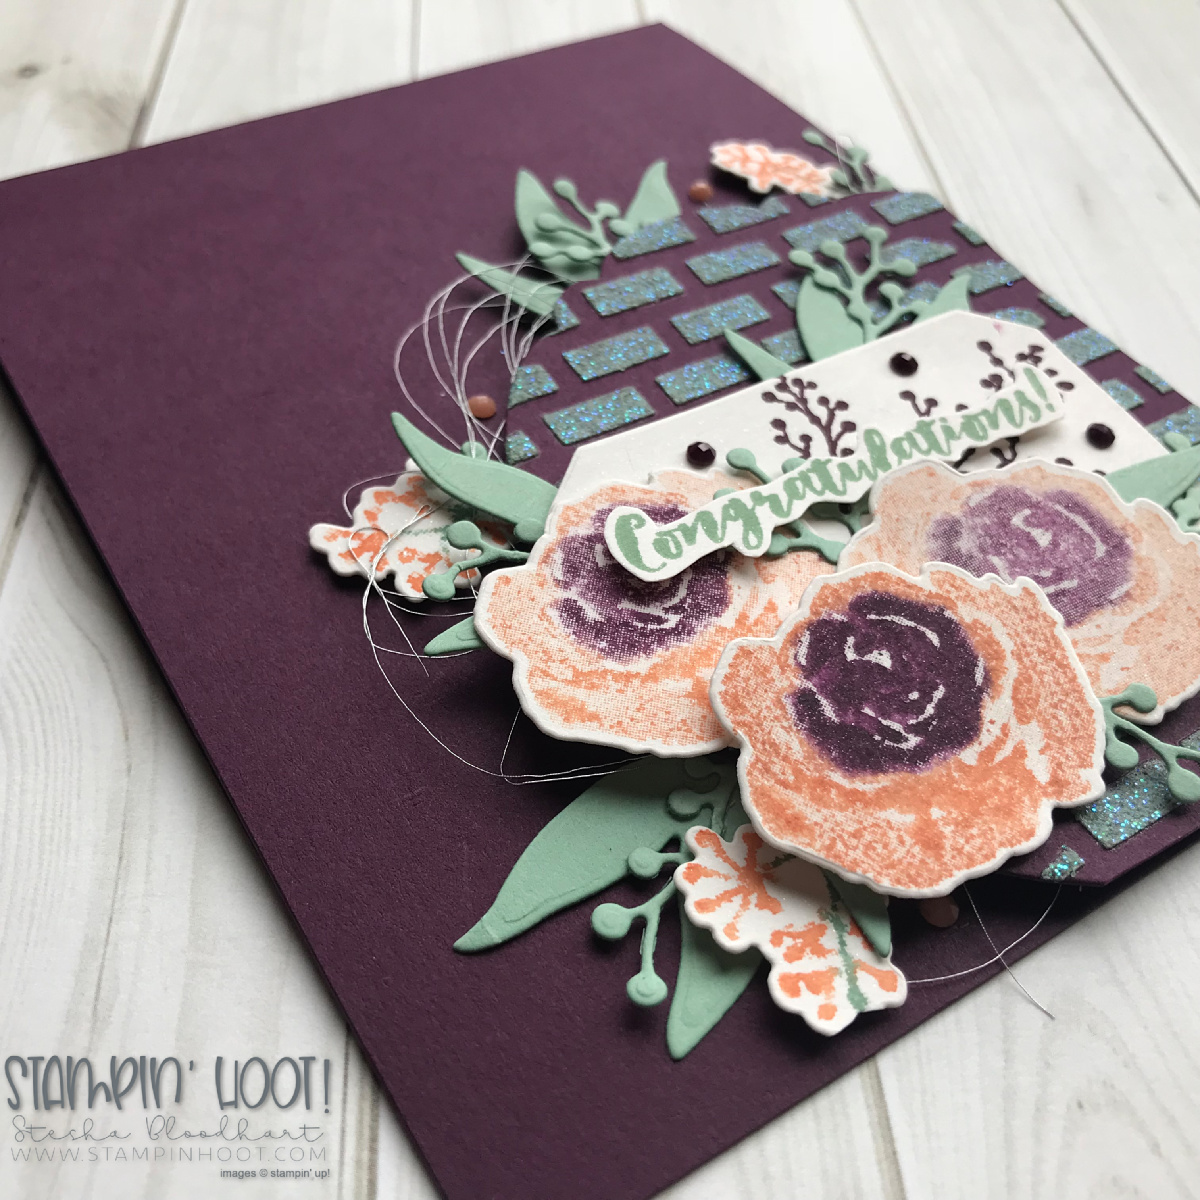 First Frost Bundle by Stampin' Up! Handmade Congratulations Card by Stesha Bloodhart, Stampin' Hoot! for #gdp157 Color Challenge. #steshabloodhart #stampinhoot